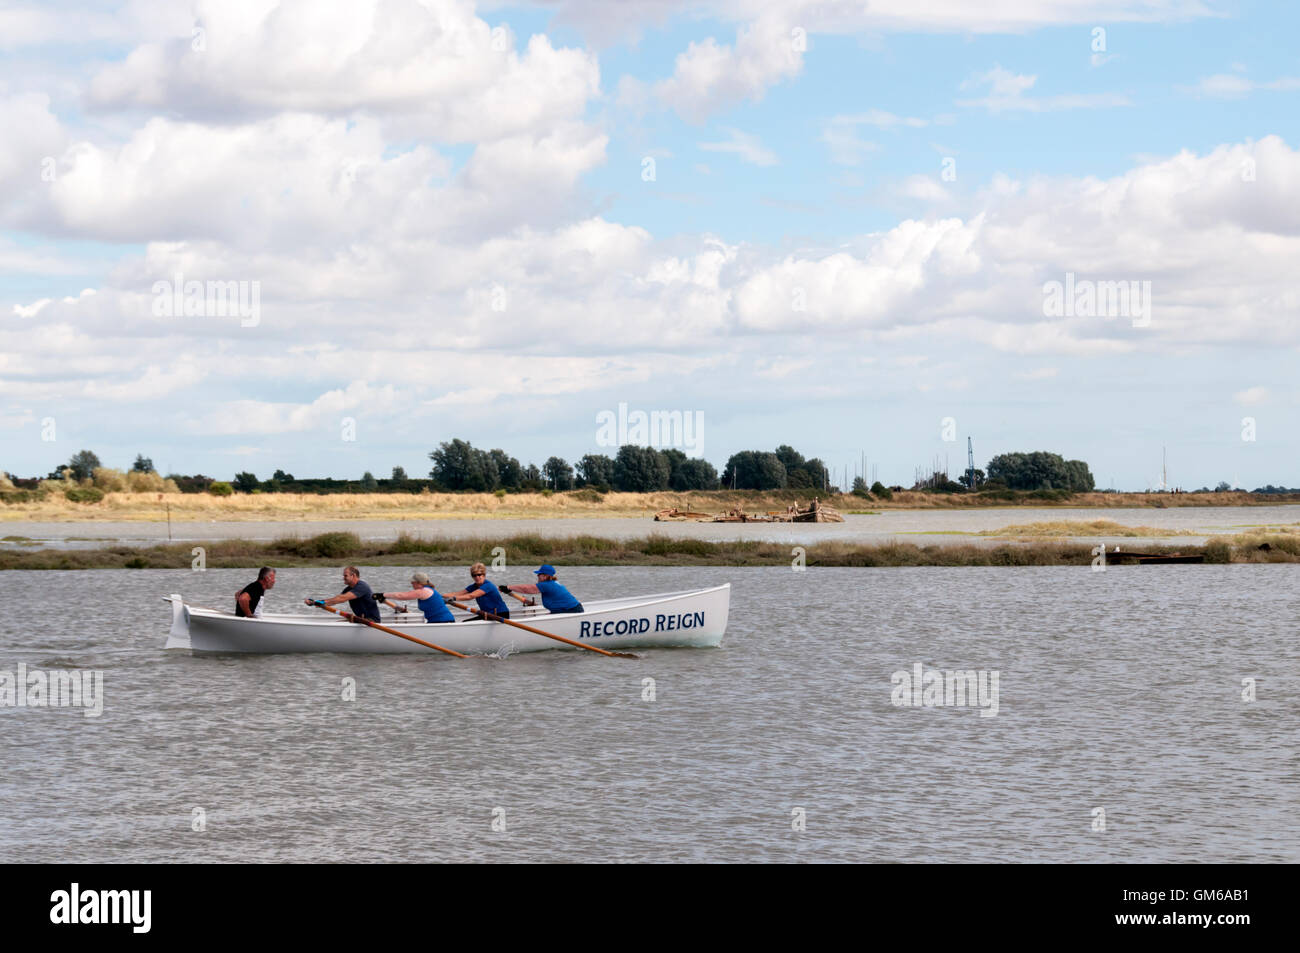 Crew of the racing gig Record Reign training on the Blackwater Estuary at Maldon, Essex. Stock Photo